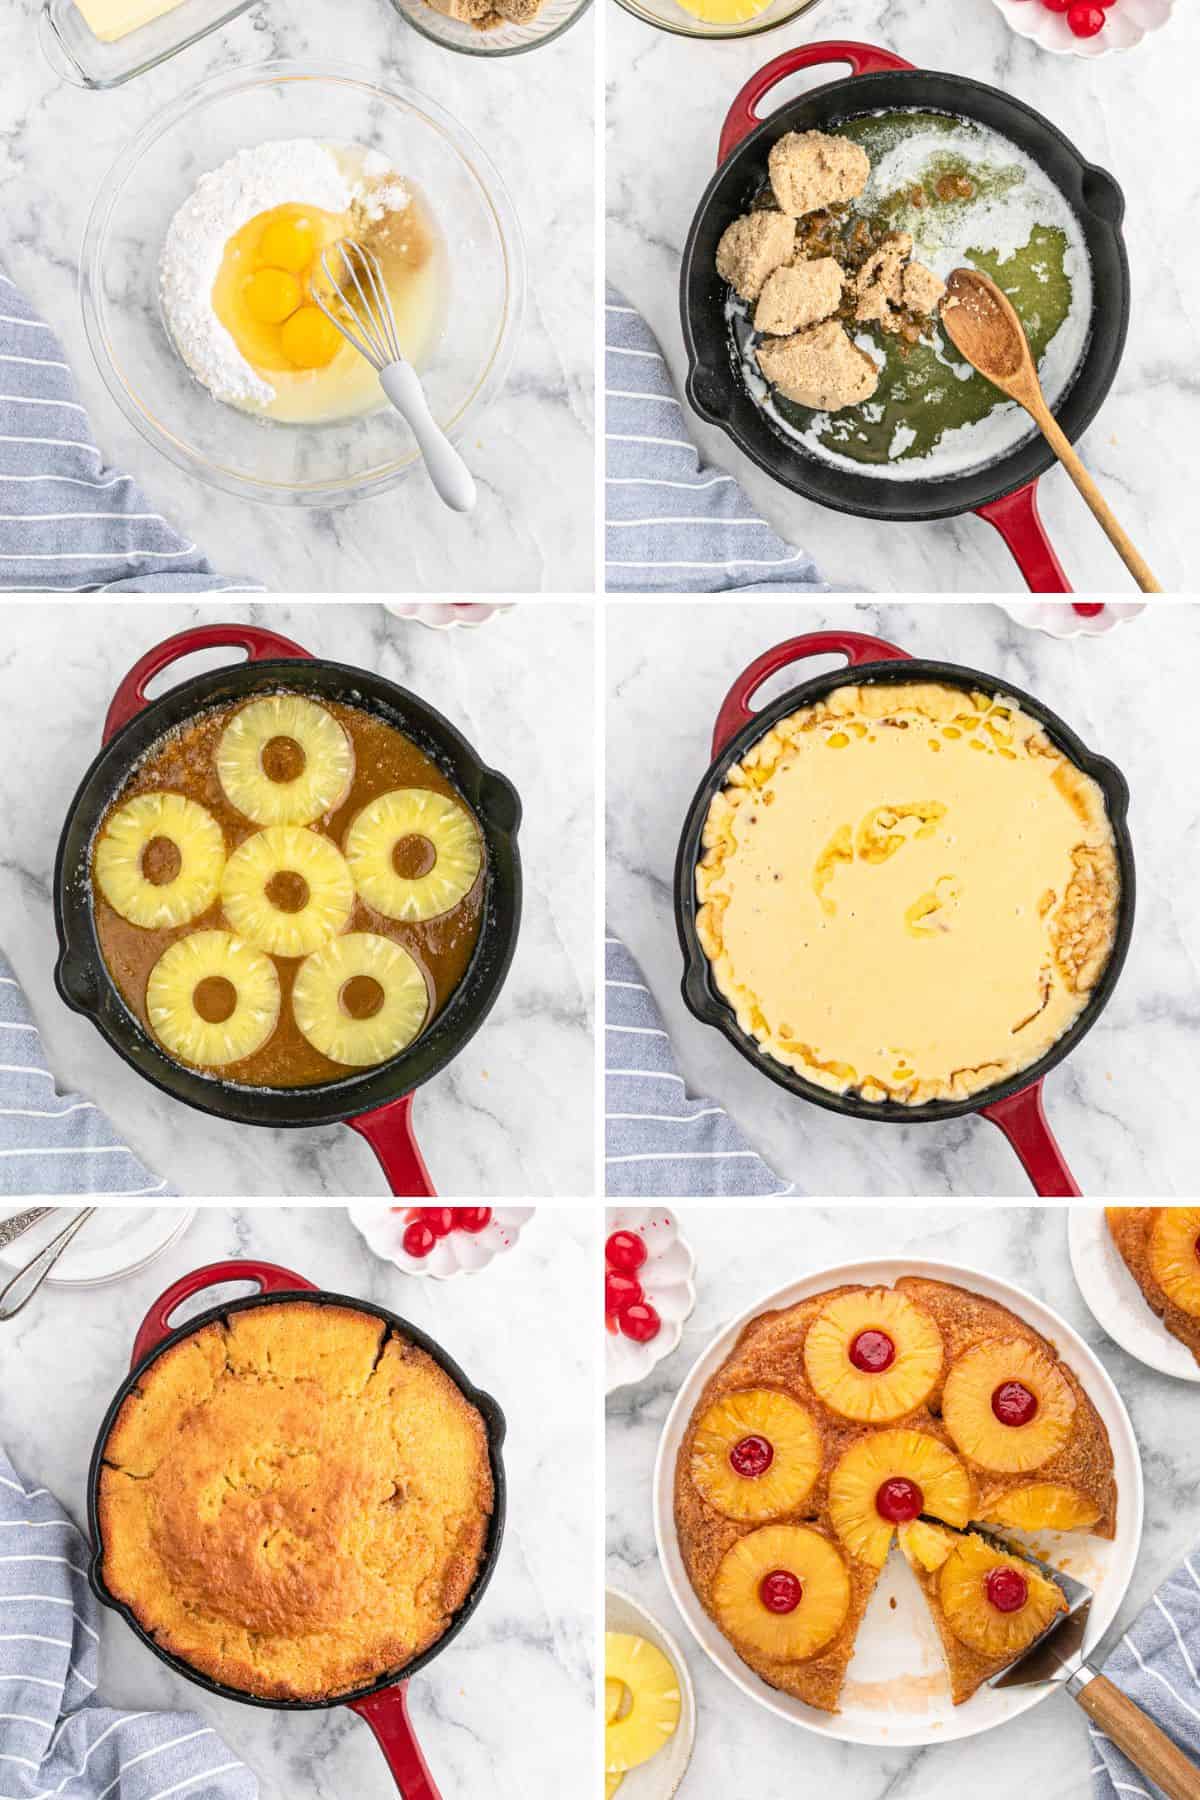 A collage showing each step in making an upside down pineapple cake.